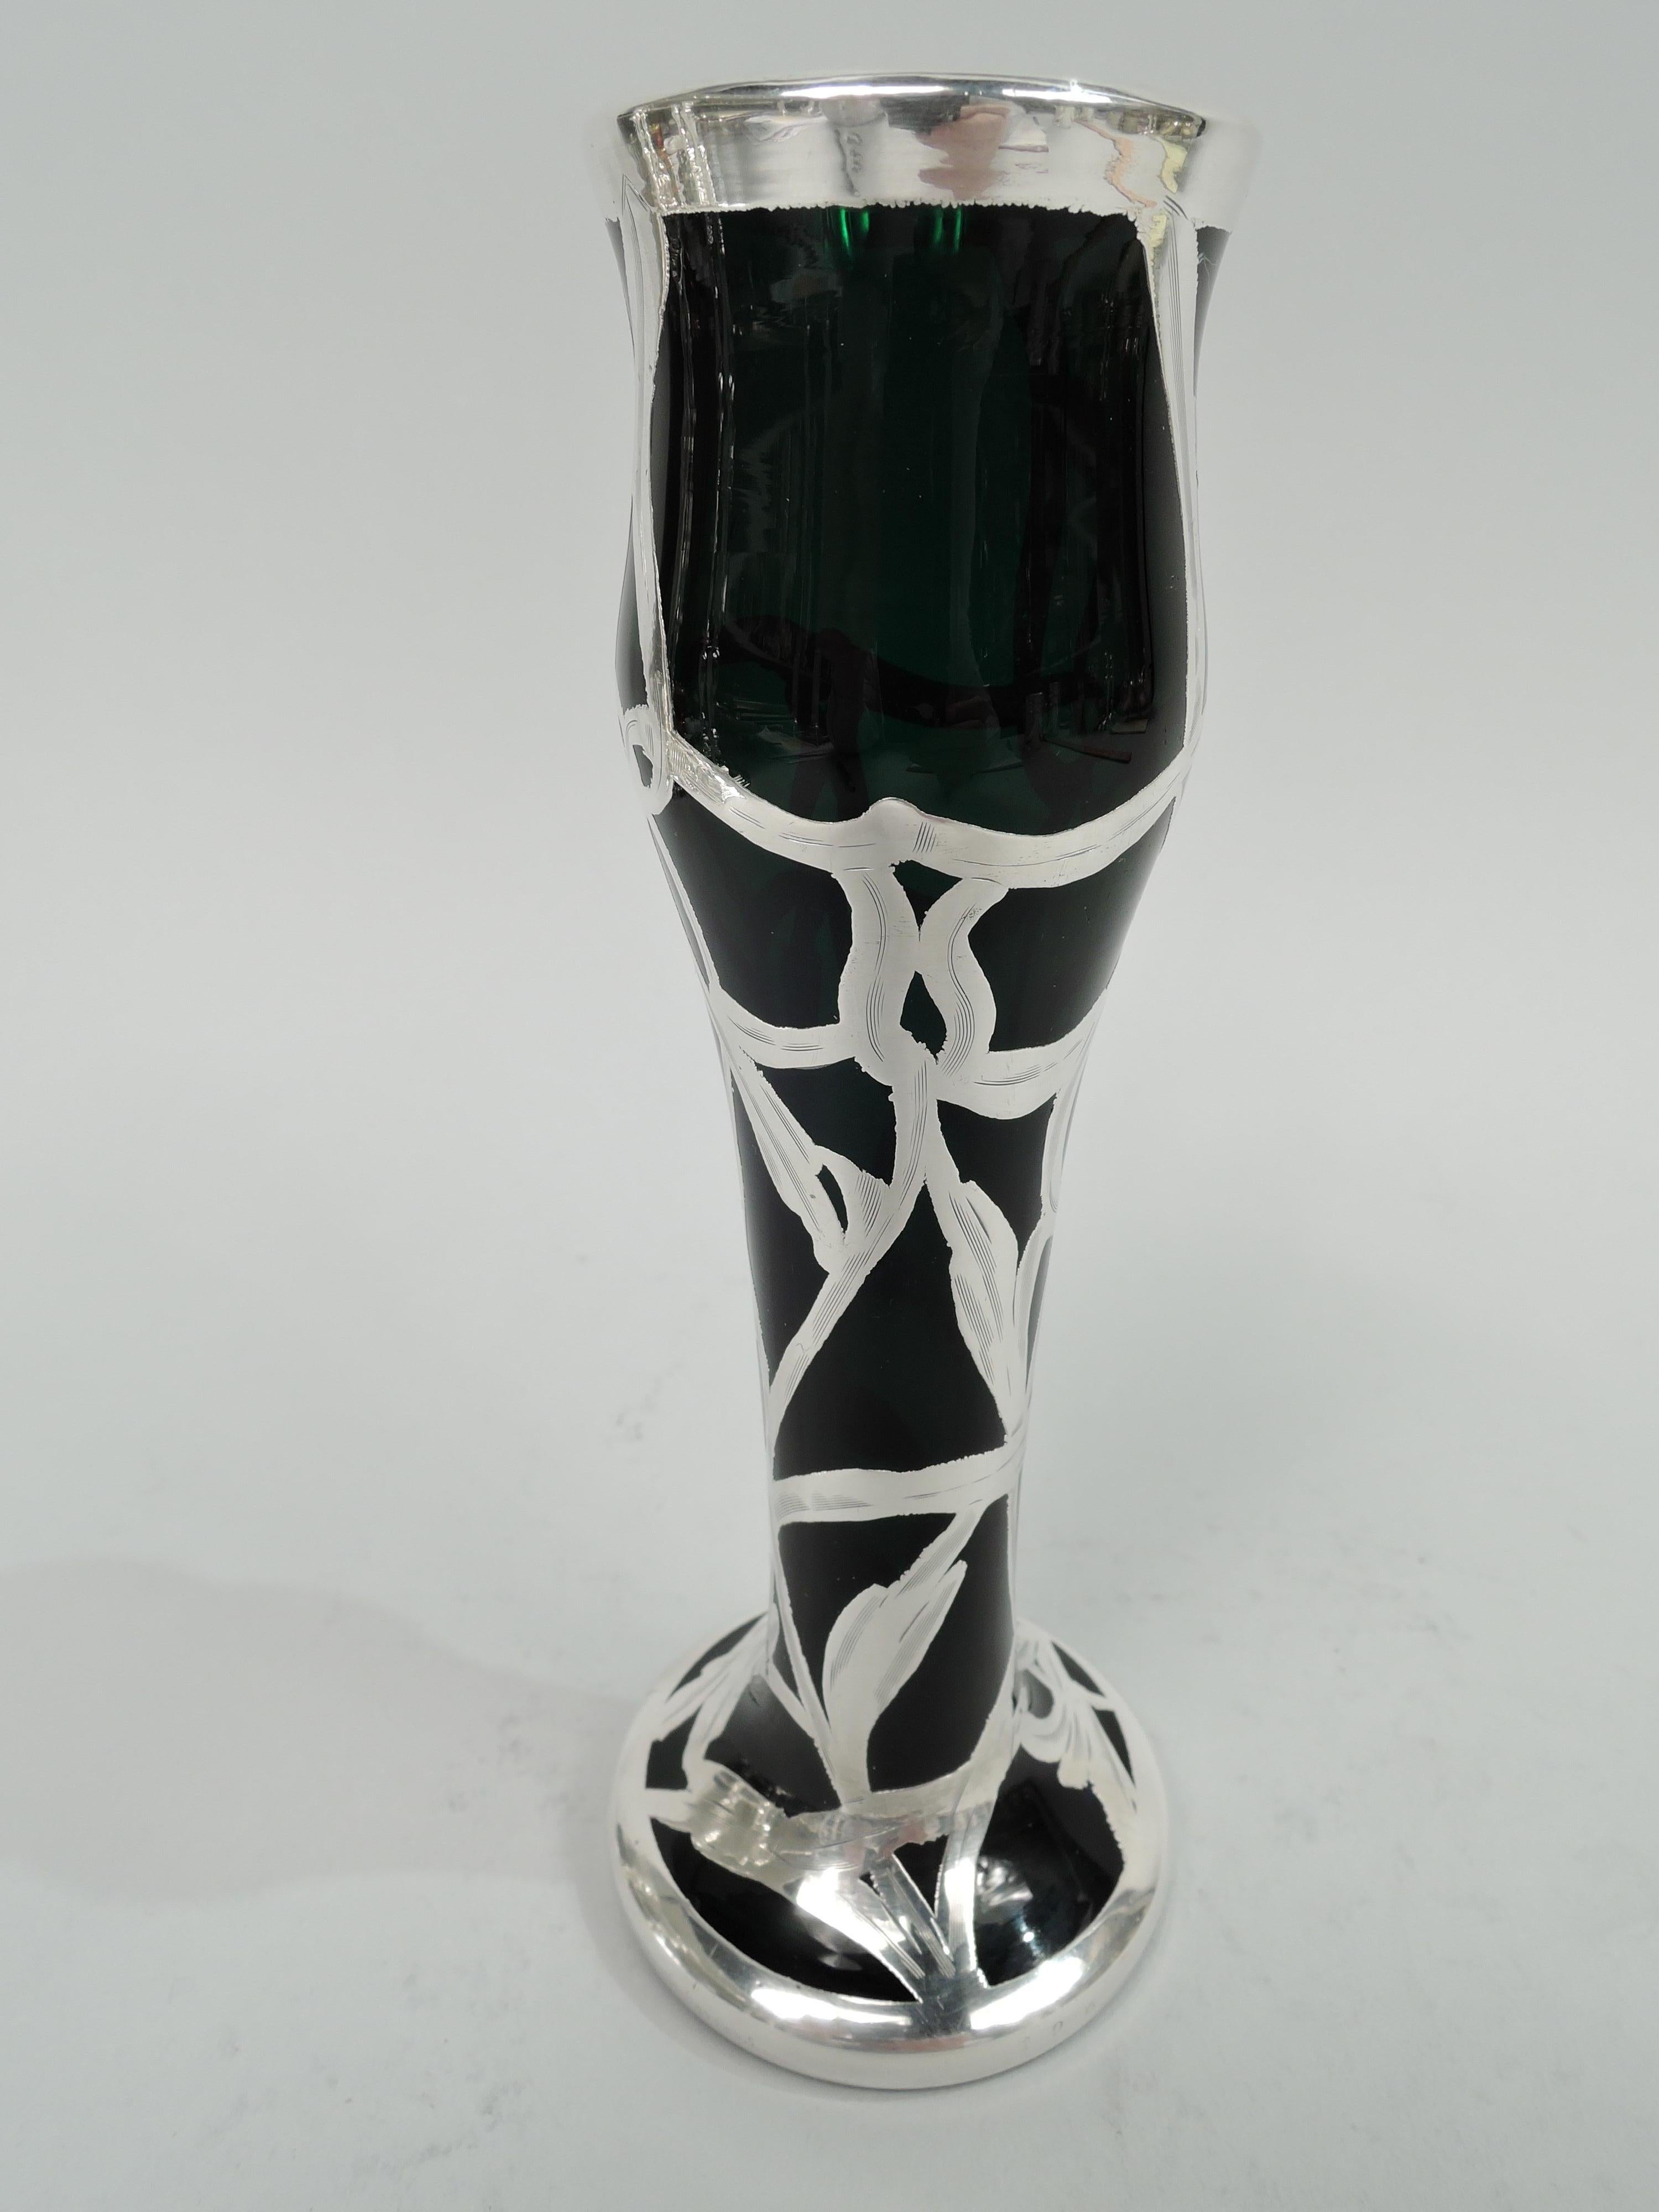 Turn-of-the-century American Art Nouveau glass vase with engraved silver overlay. Tulip-form with flower-bud top on cylindrical body flowing into spread foot. Overlay in form of entwined and interlaced tendrils. Glass is green. Marks include no. 196.